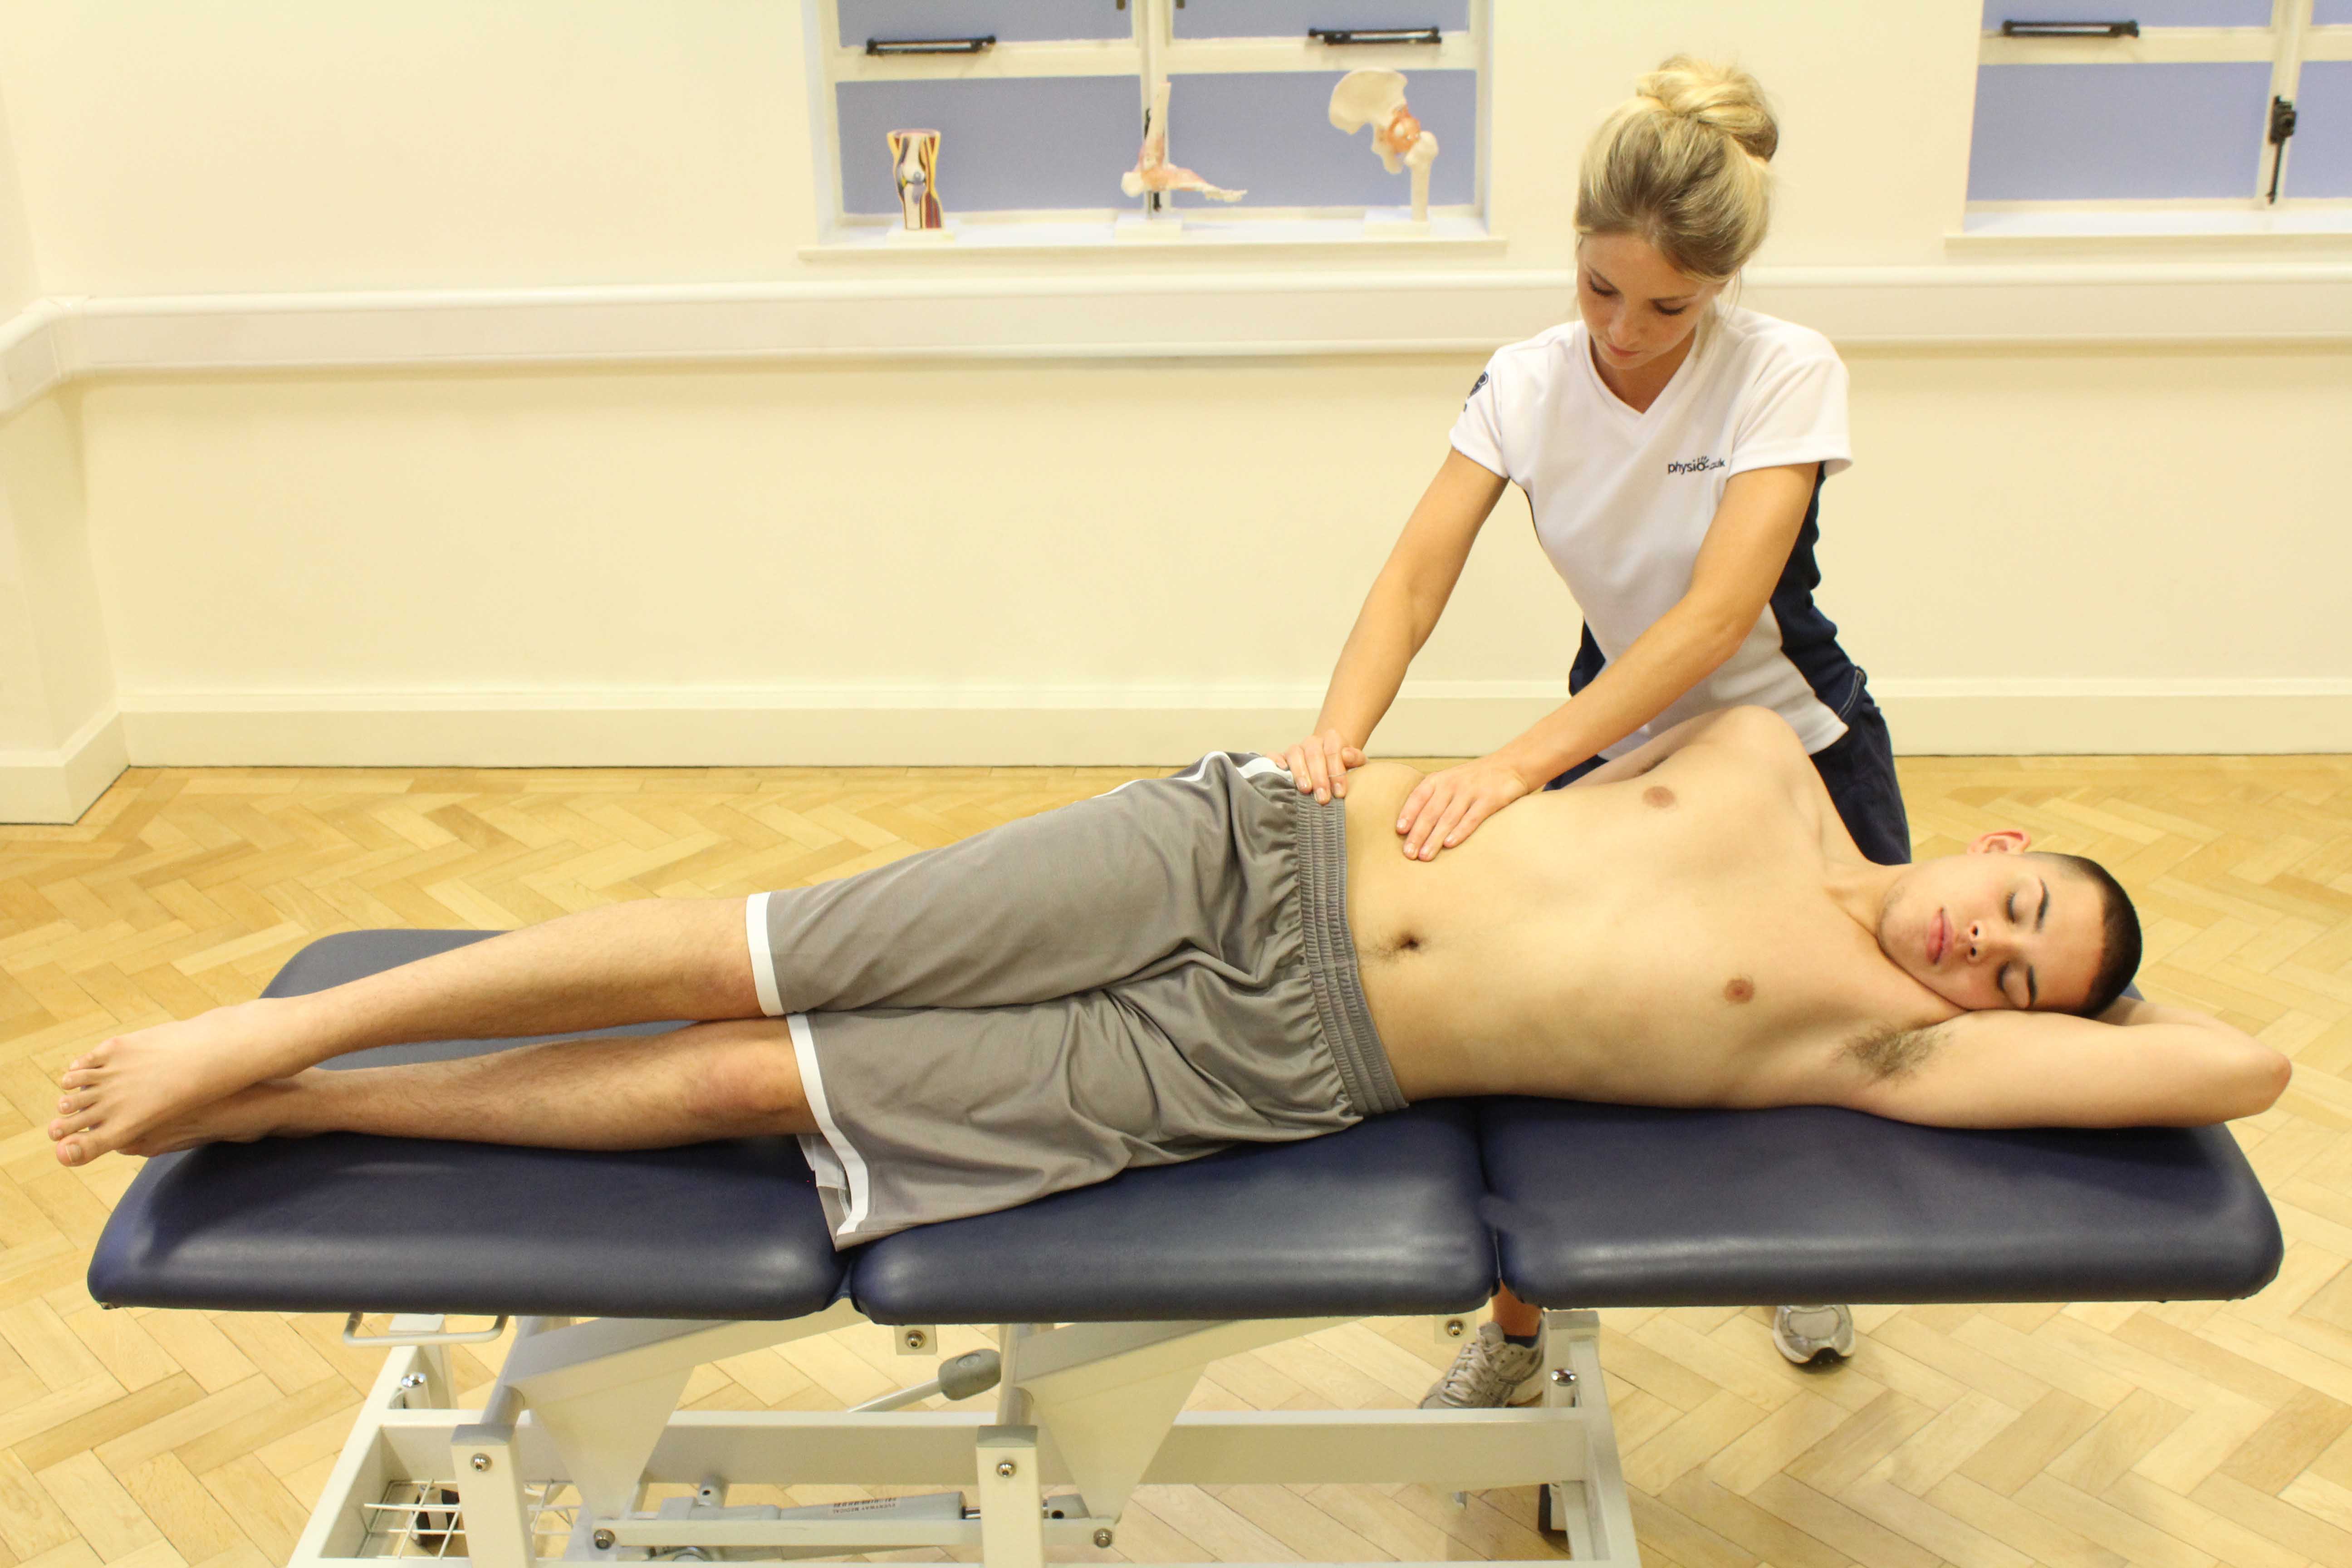 Stability and strengthening exercises conducted on a wobble board with the assistance of a specialist physiotherapist 